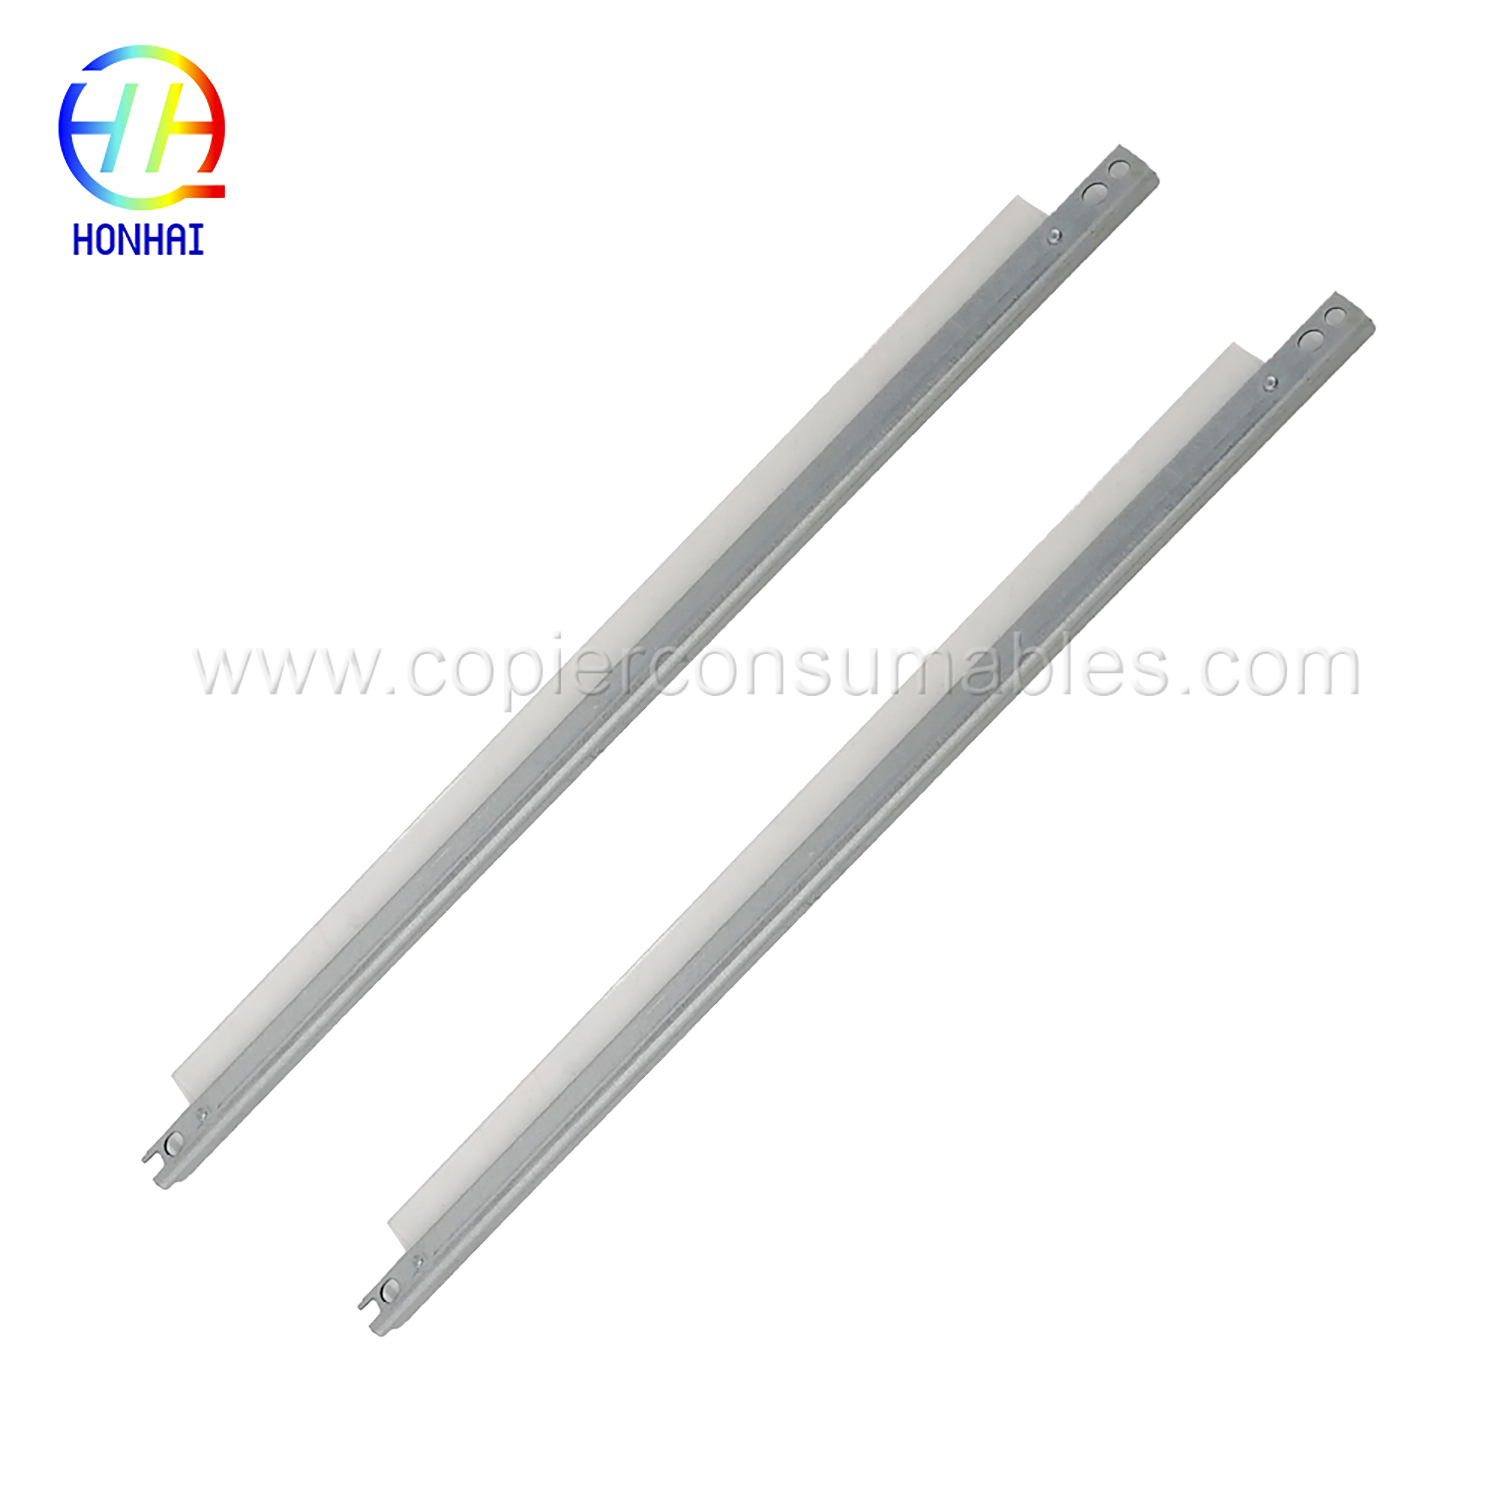 Drum cleaning blade for HP 1020 M1319 3015 3020 3030 3052 3050 3055 1010 1020 1022 M1005 (6) 拷贝